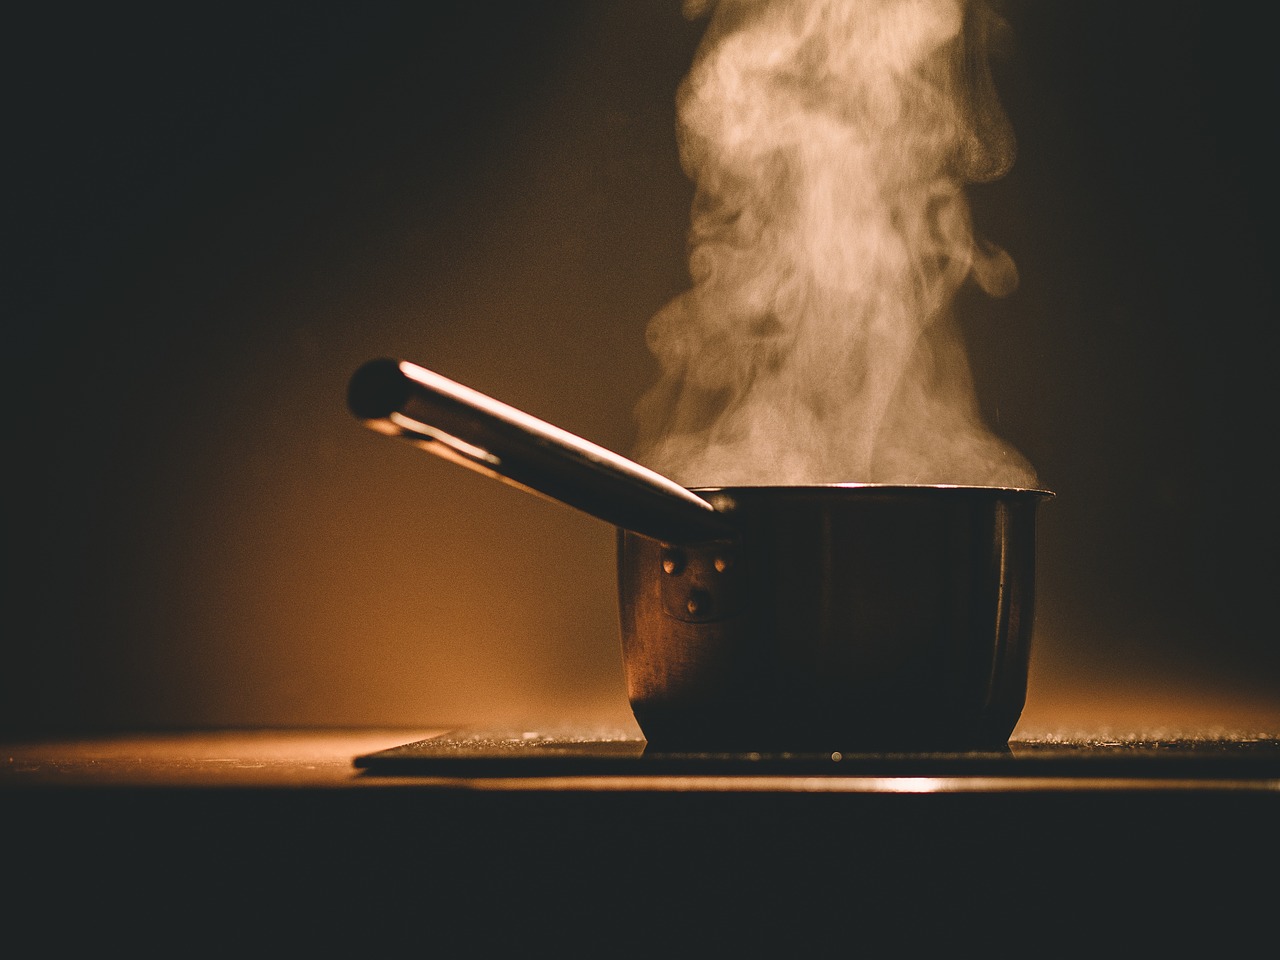 how to choose safe, non-toxic cookware